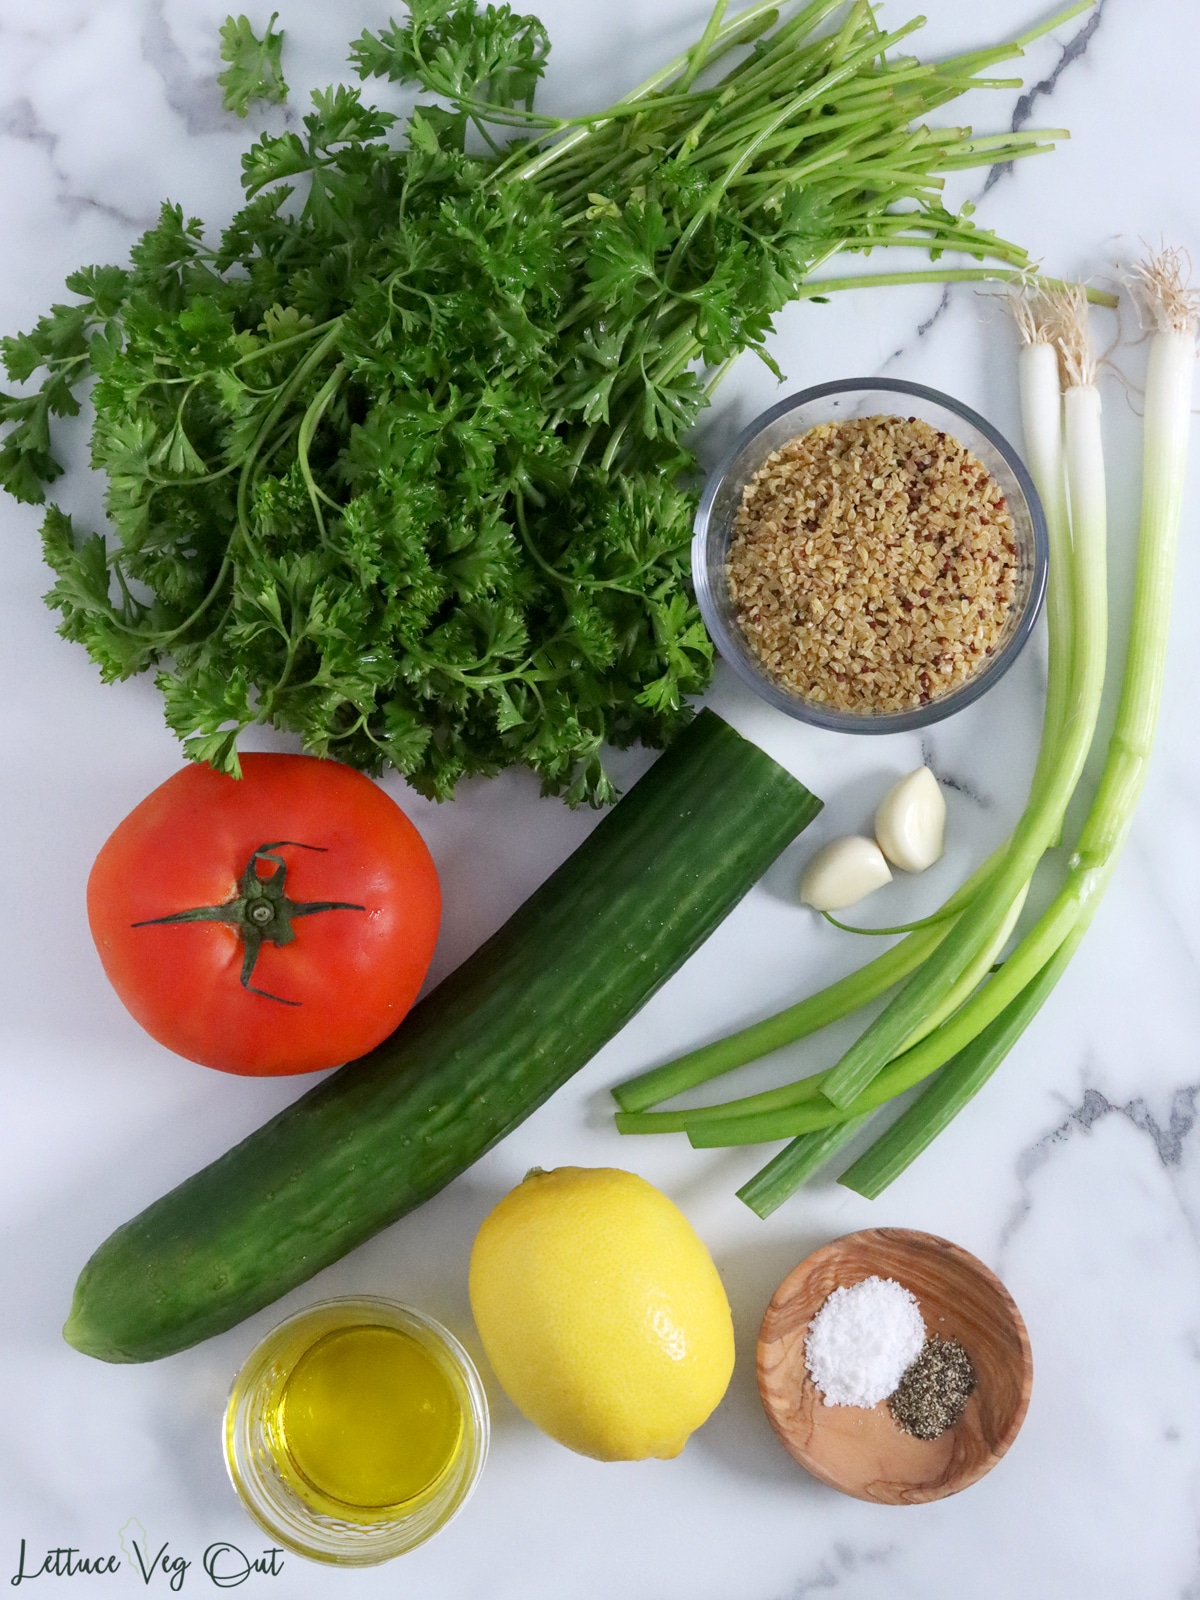 Vegetables and other ingredients for tabbouleh salad.